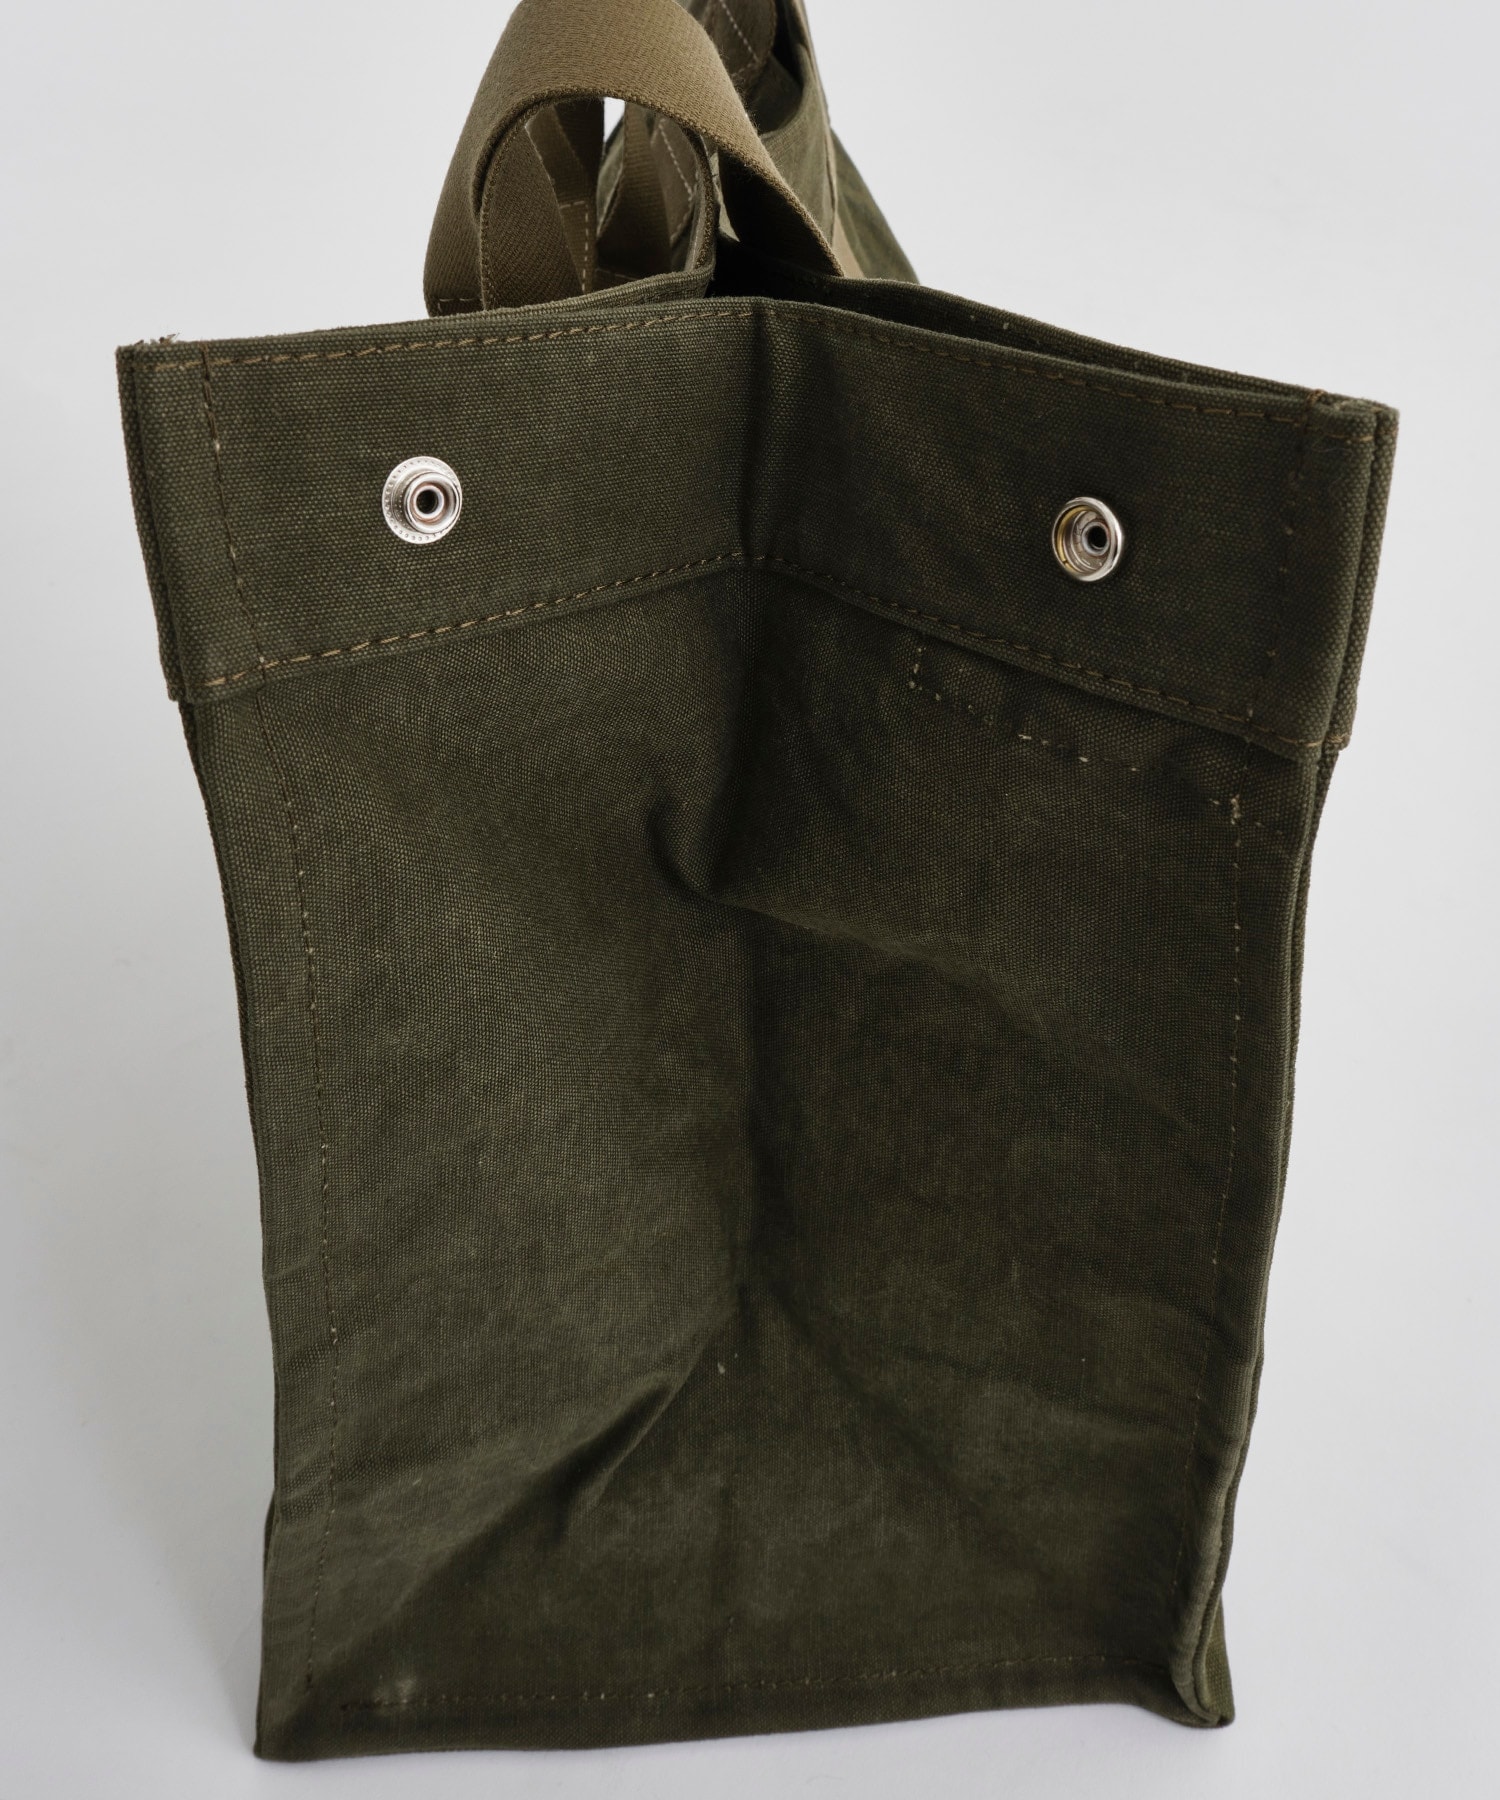 EASY TOTE LARGE READYMADE